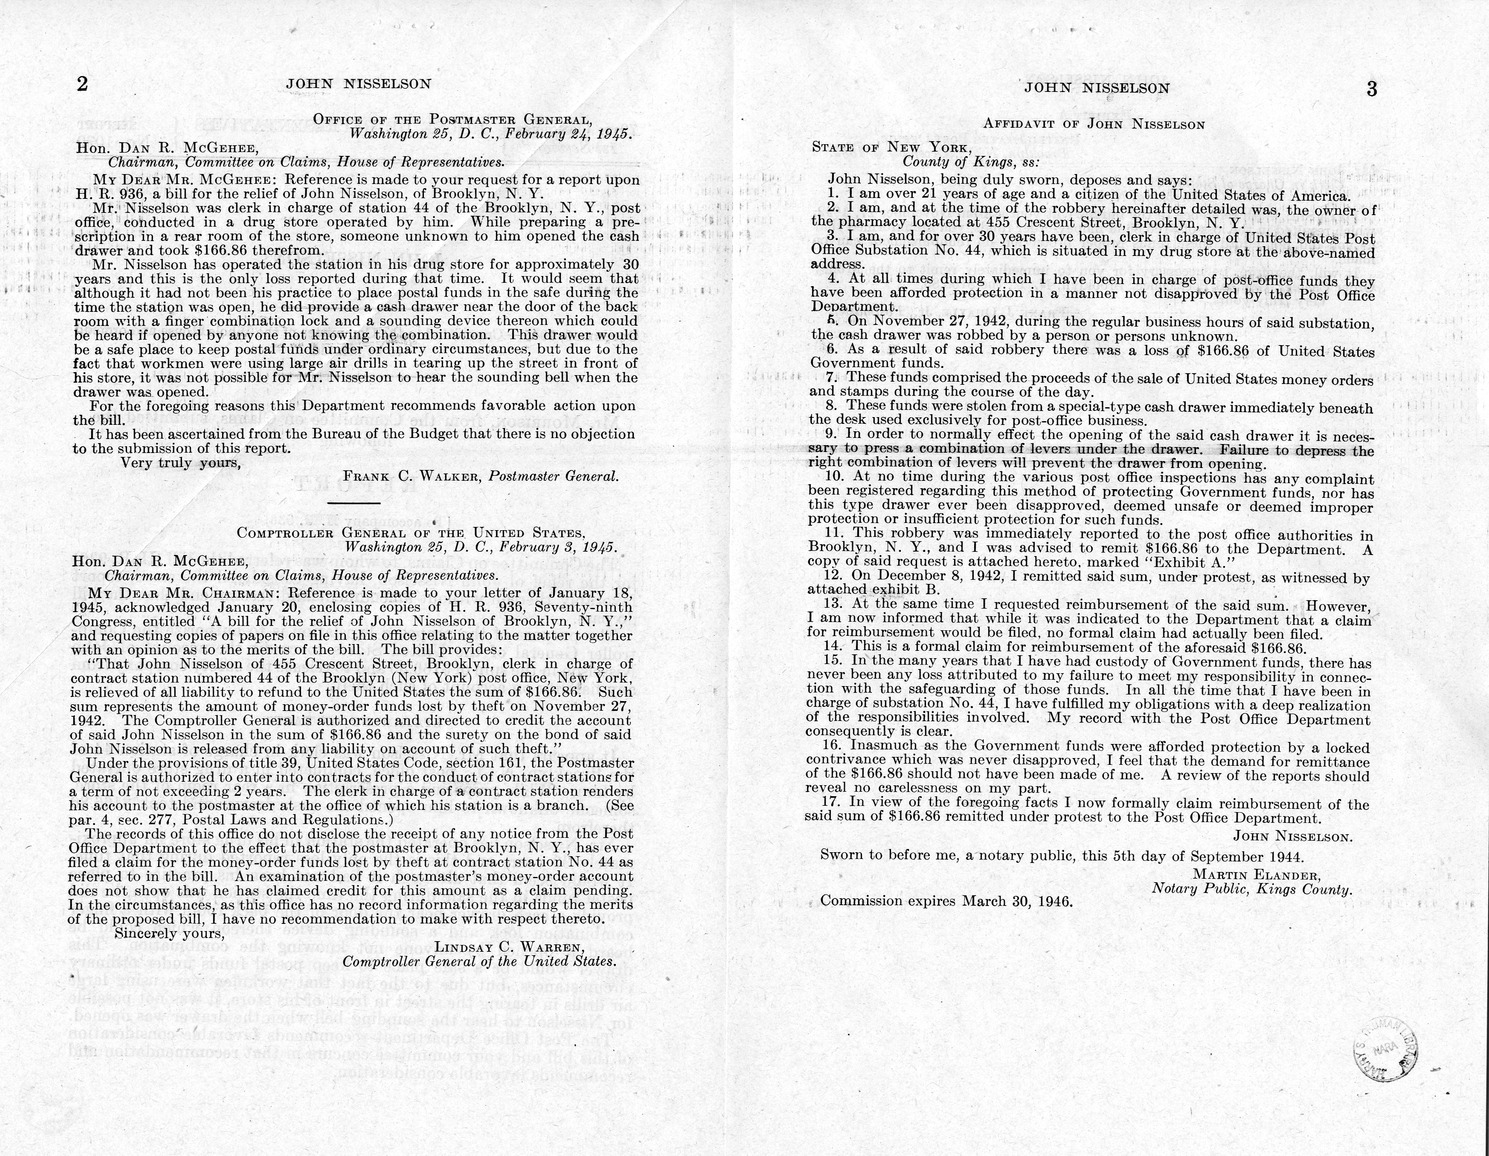 Memorandum from Frederick J. Bailey to M. C. Latta, H.R. 936, For the Relief of John Nisselson, of Brooklyn, New York, with Attachments